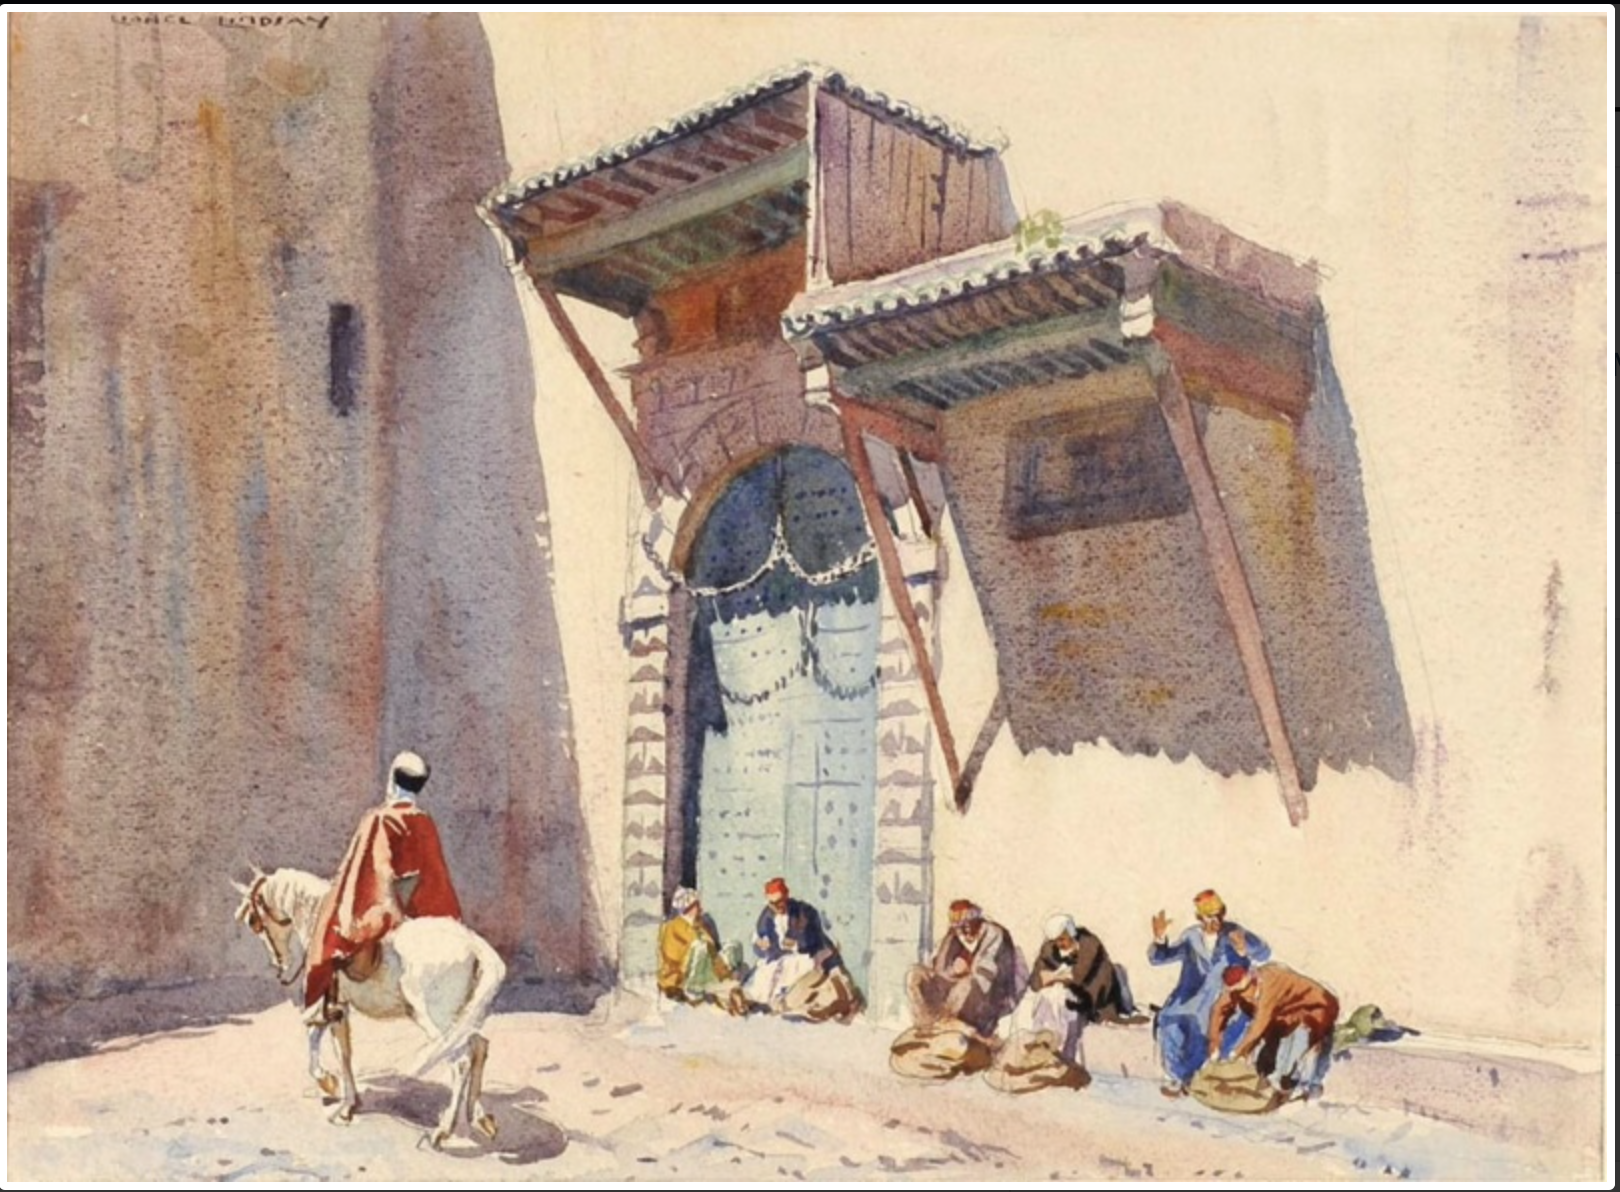 A watercolour painting showing a scene in Algeria, with a man on a horse in the foreground, and a group of men in the background sitting against the wall.